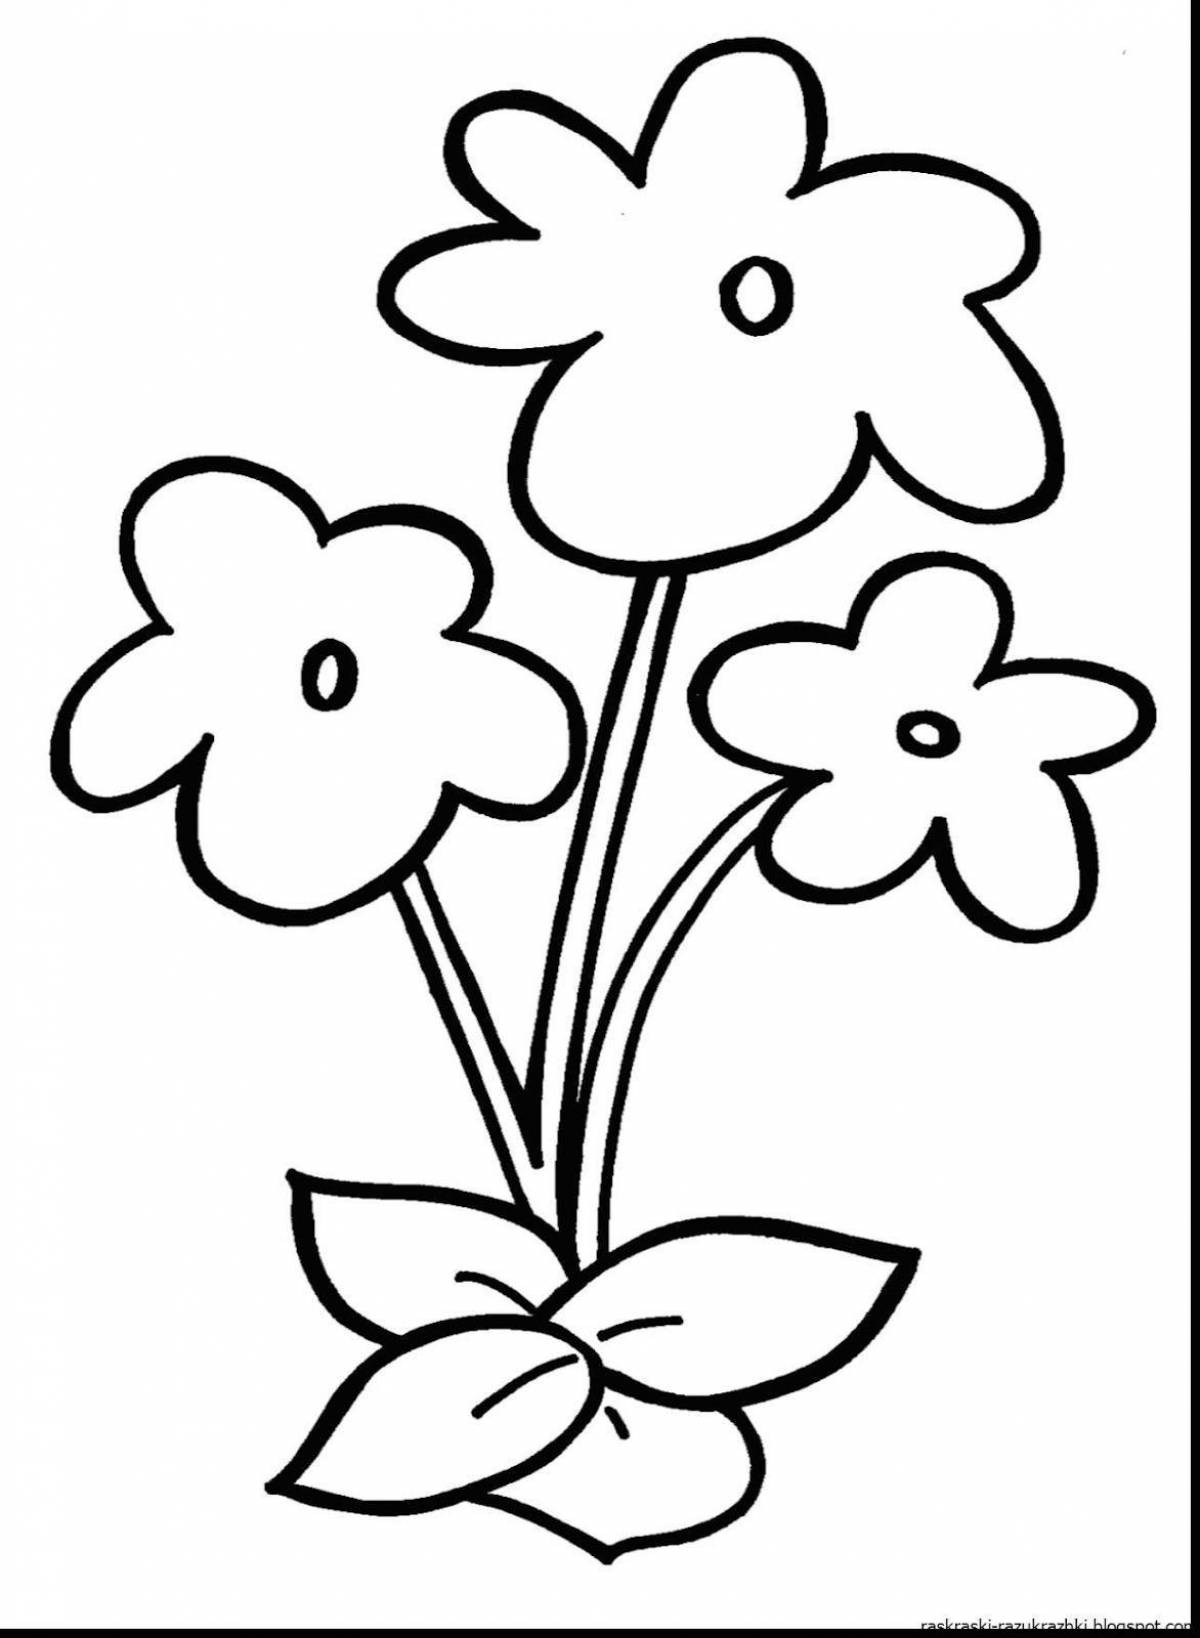 Playful flower coloring for children 2-3 years old